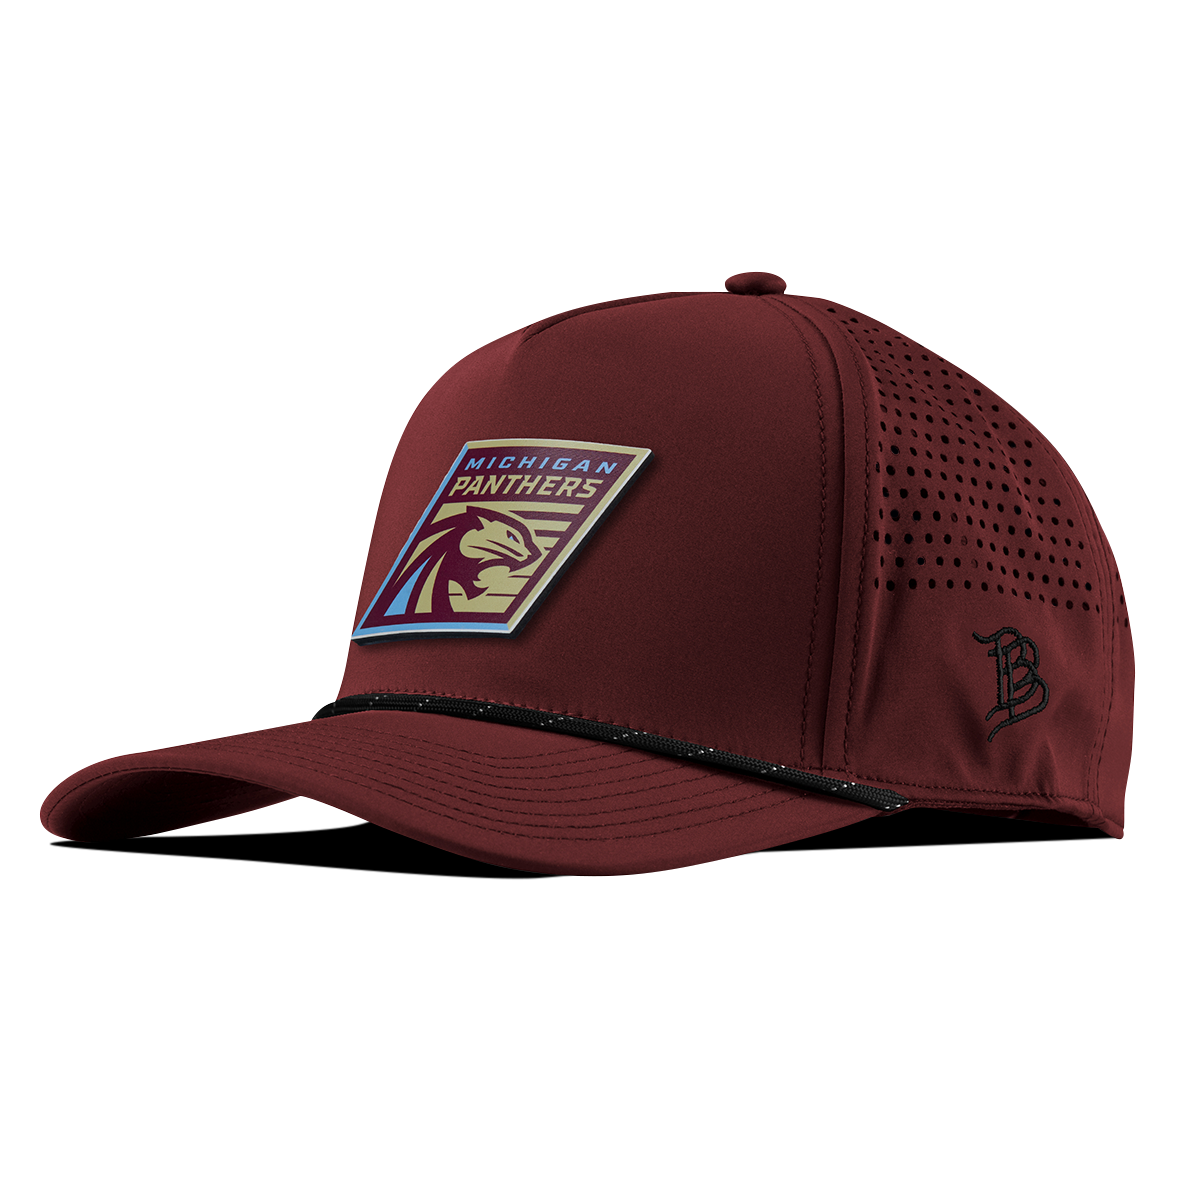 Michigan Panthers Maroon Curved 5 Panel Rope